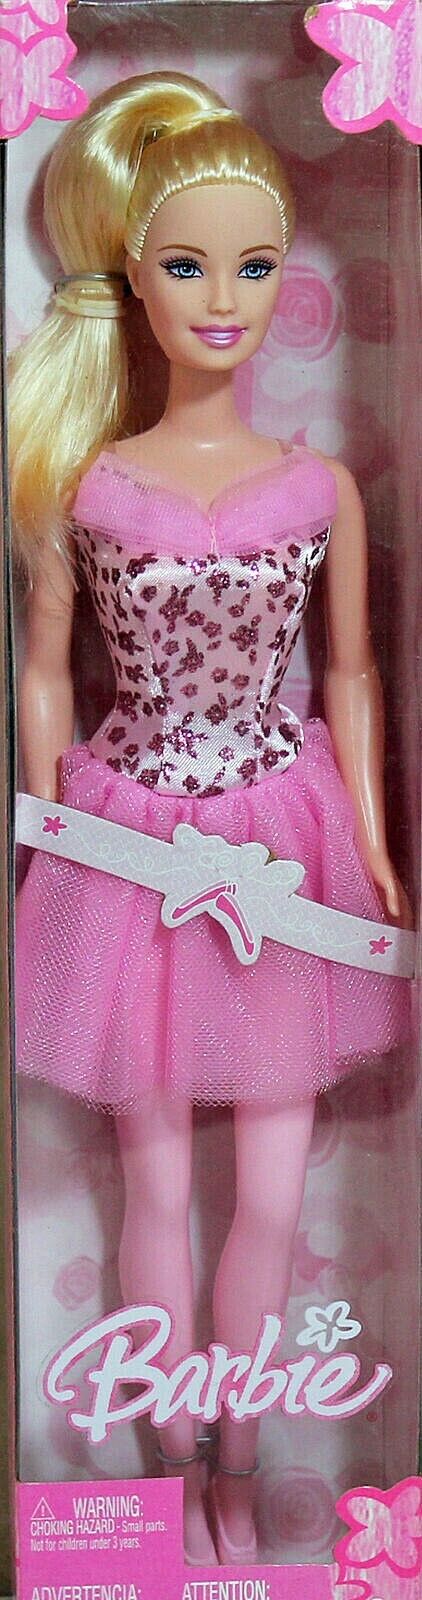 Barbie My First Ballet Lesson Barbie Doll J1776 Pink Ballerina Lace Tulle 2005